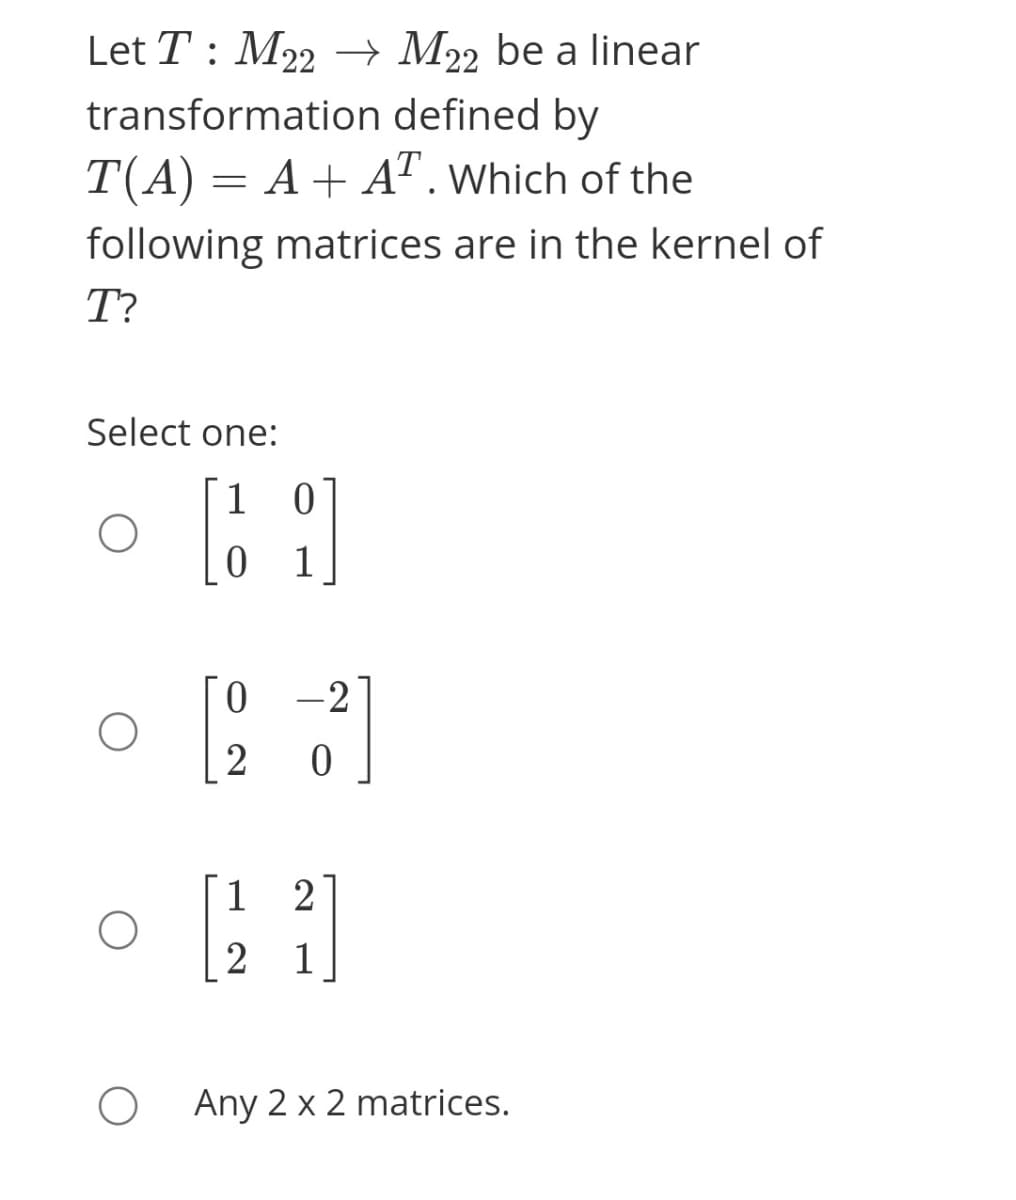 Let T : M22 –→ M22 be a linear
transformation defined by
T(A) = A+ A". Which of the
following matrices are in the kernel of
T?
Select one:
1 0
1
0 -2
2
1
1
Any 2 x 2 matrices.
2]
